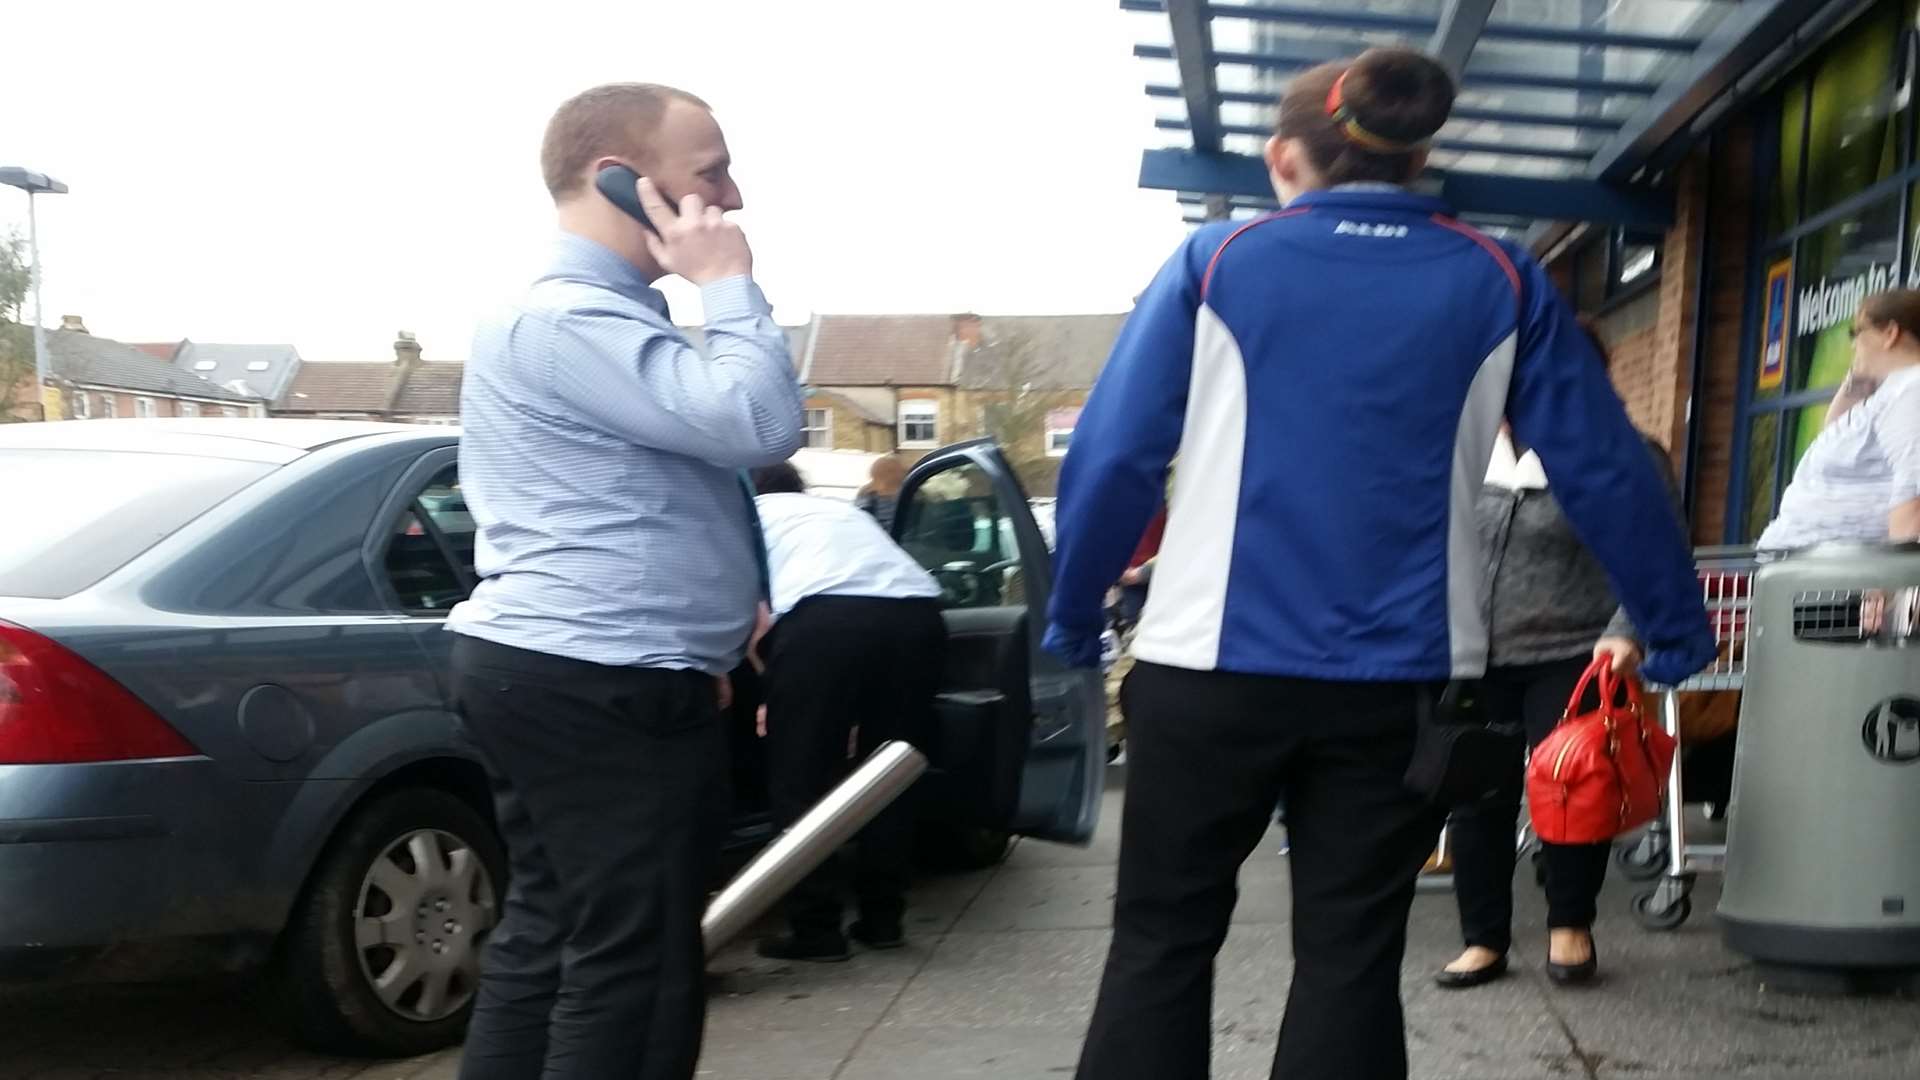 Staff rushed out of Gillingham Aldi after a car crashed into bollards